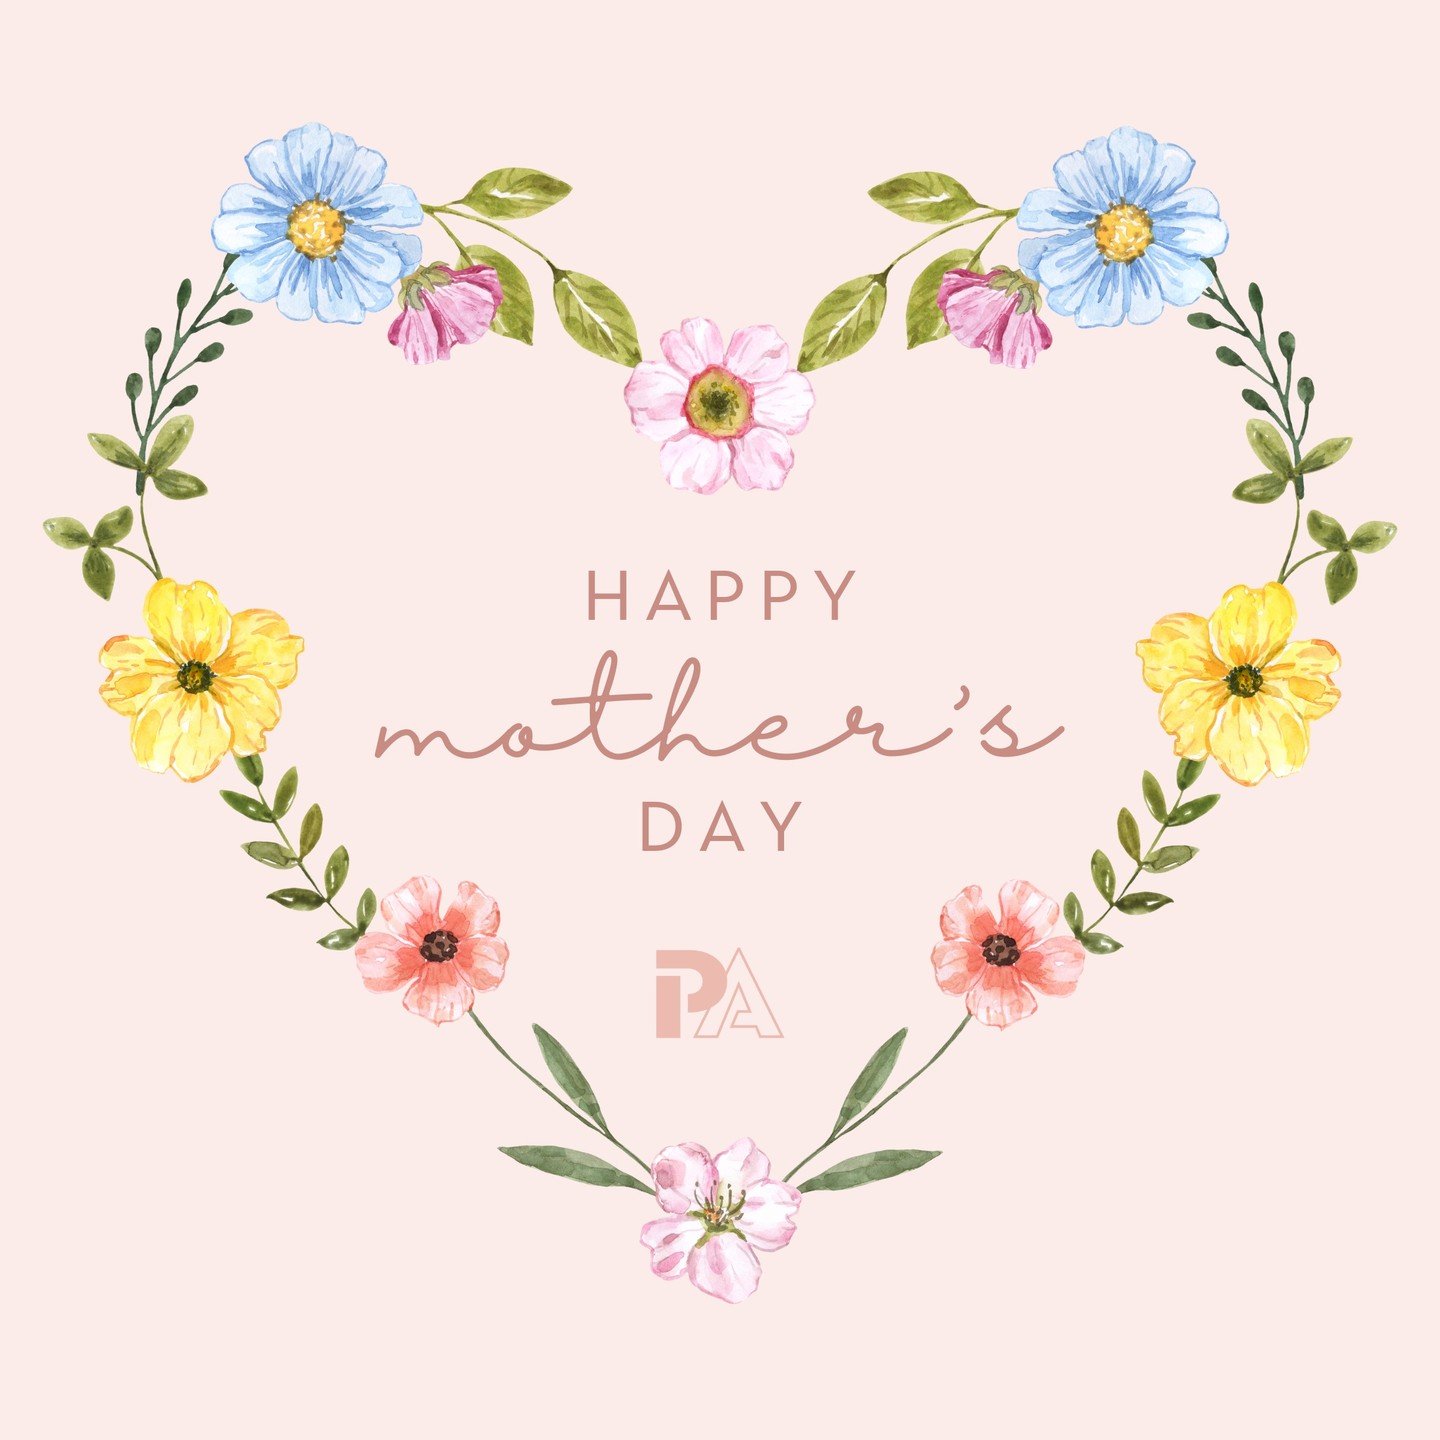 Happy Mother's Day from Pack Athletics. 

On this special occasion of Mother's Day, we at Pack Athletics would like to express our heartfelt appreciation and gratitude to all the amazing mothers out there. Your unwavering support and love play an int